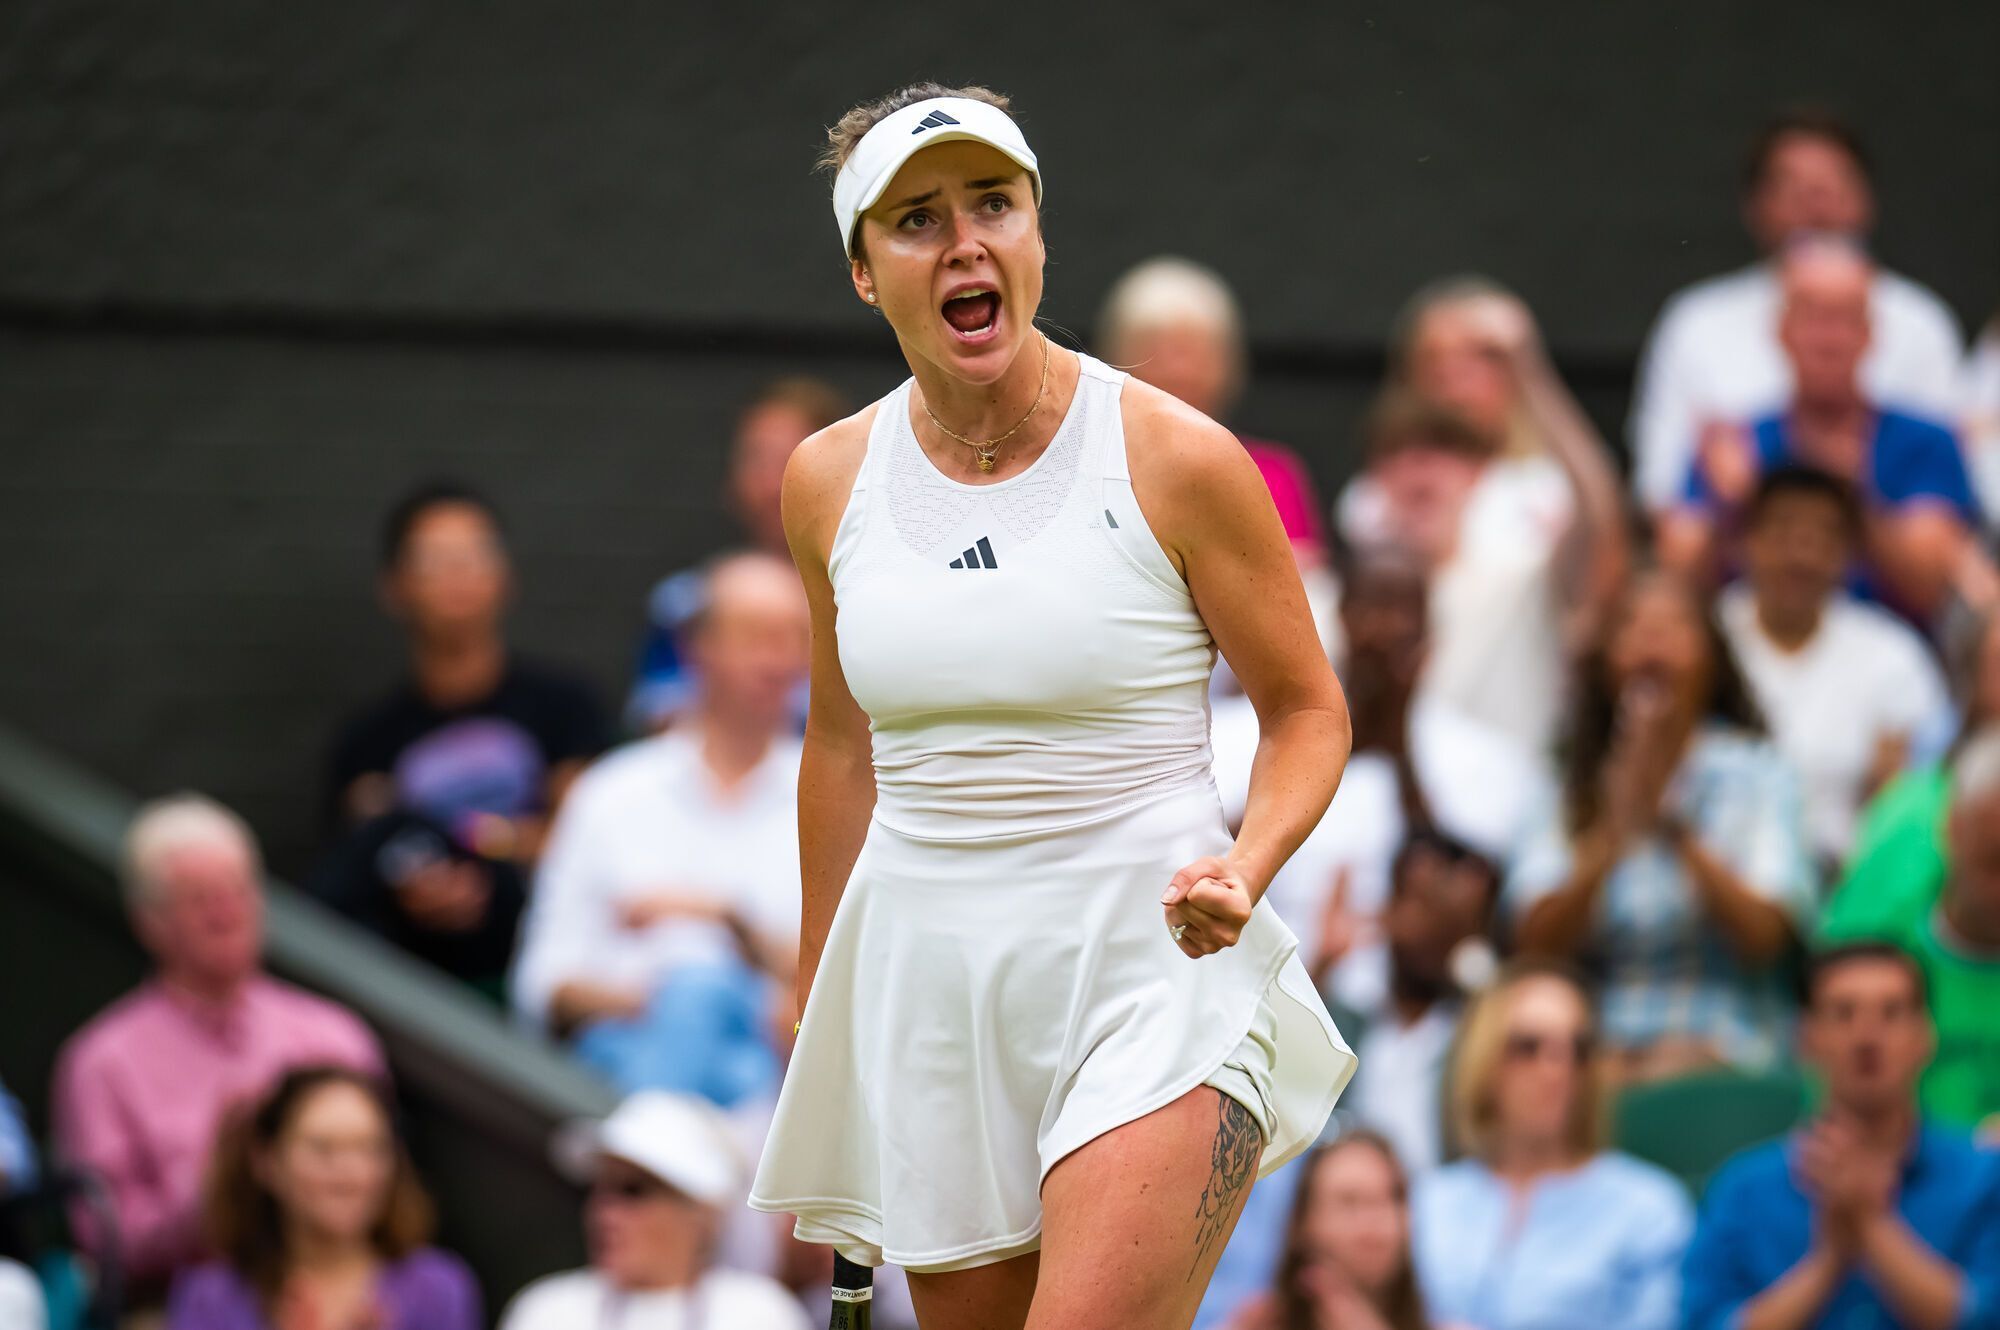 ''Are you crazy?'' French journalist's question provoked a strong reaction from Svitolina. Video